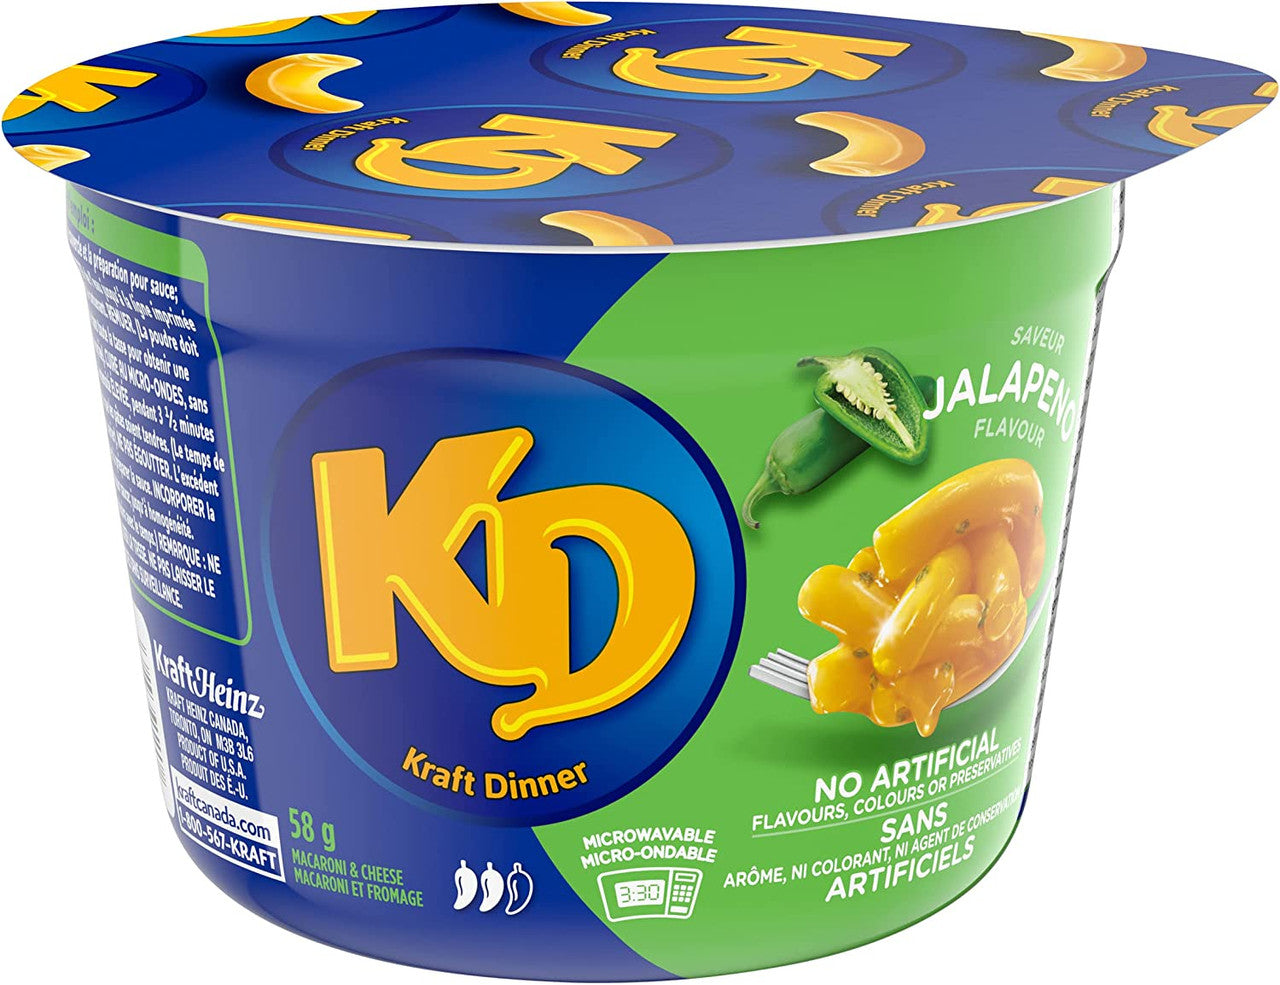 KD Kraft Dinner Jalapeno Flavor Snack Cups, 58g/2 oz. 1 Cup (Imported from Canada)